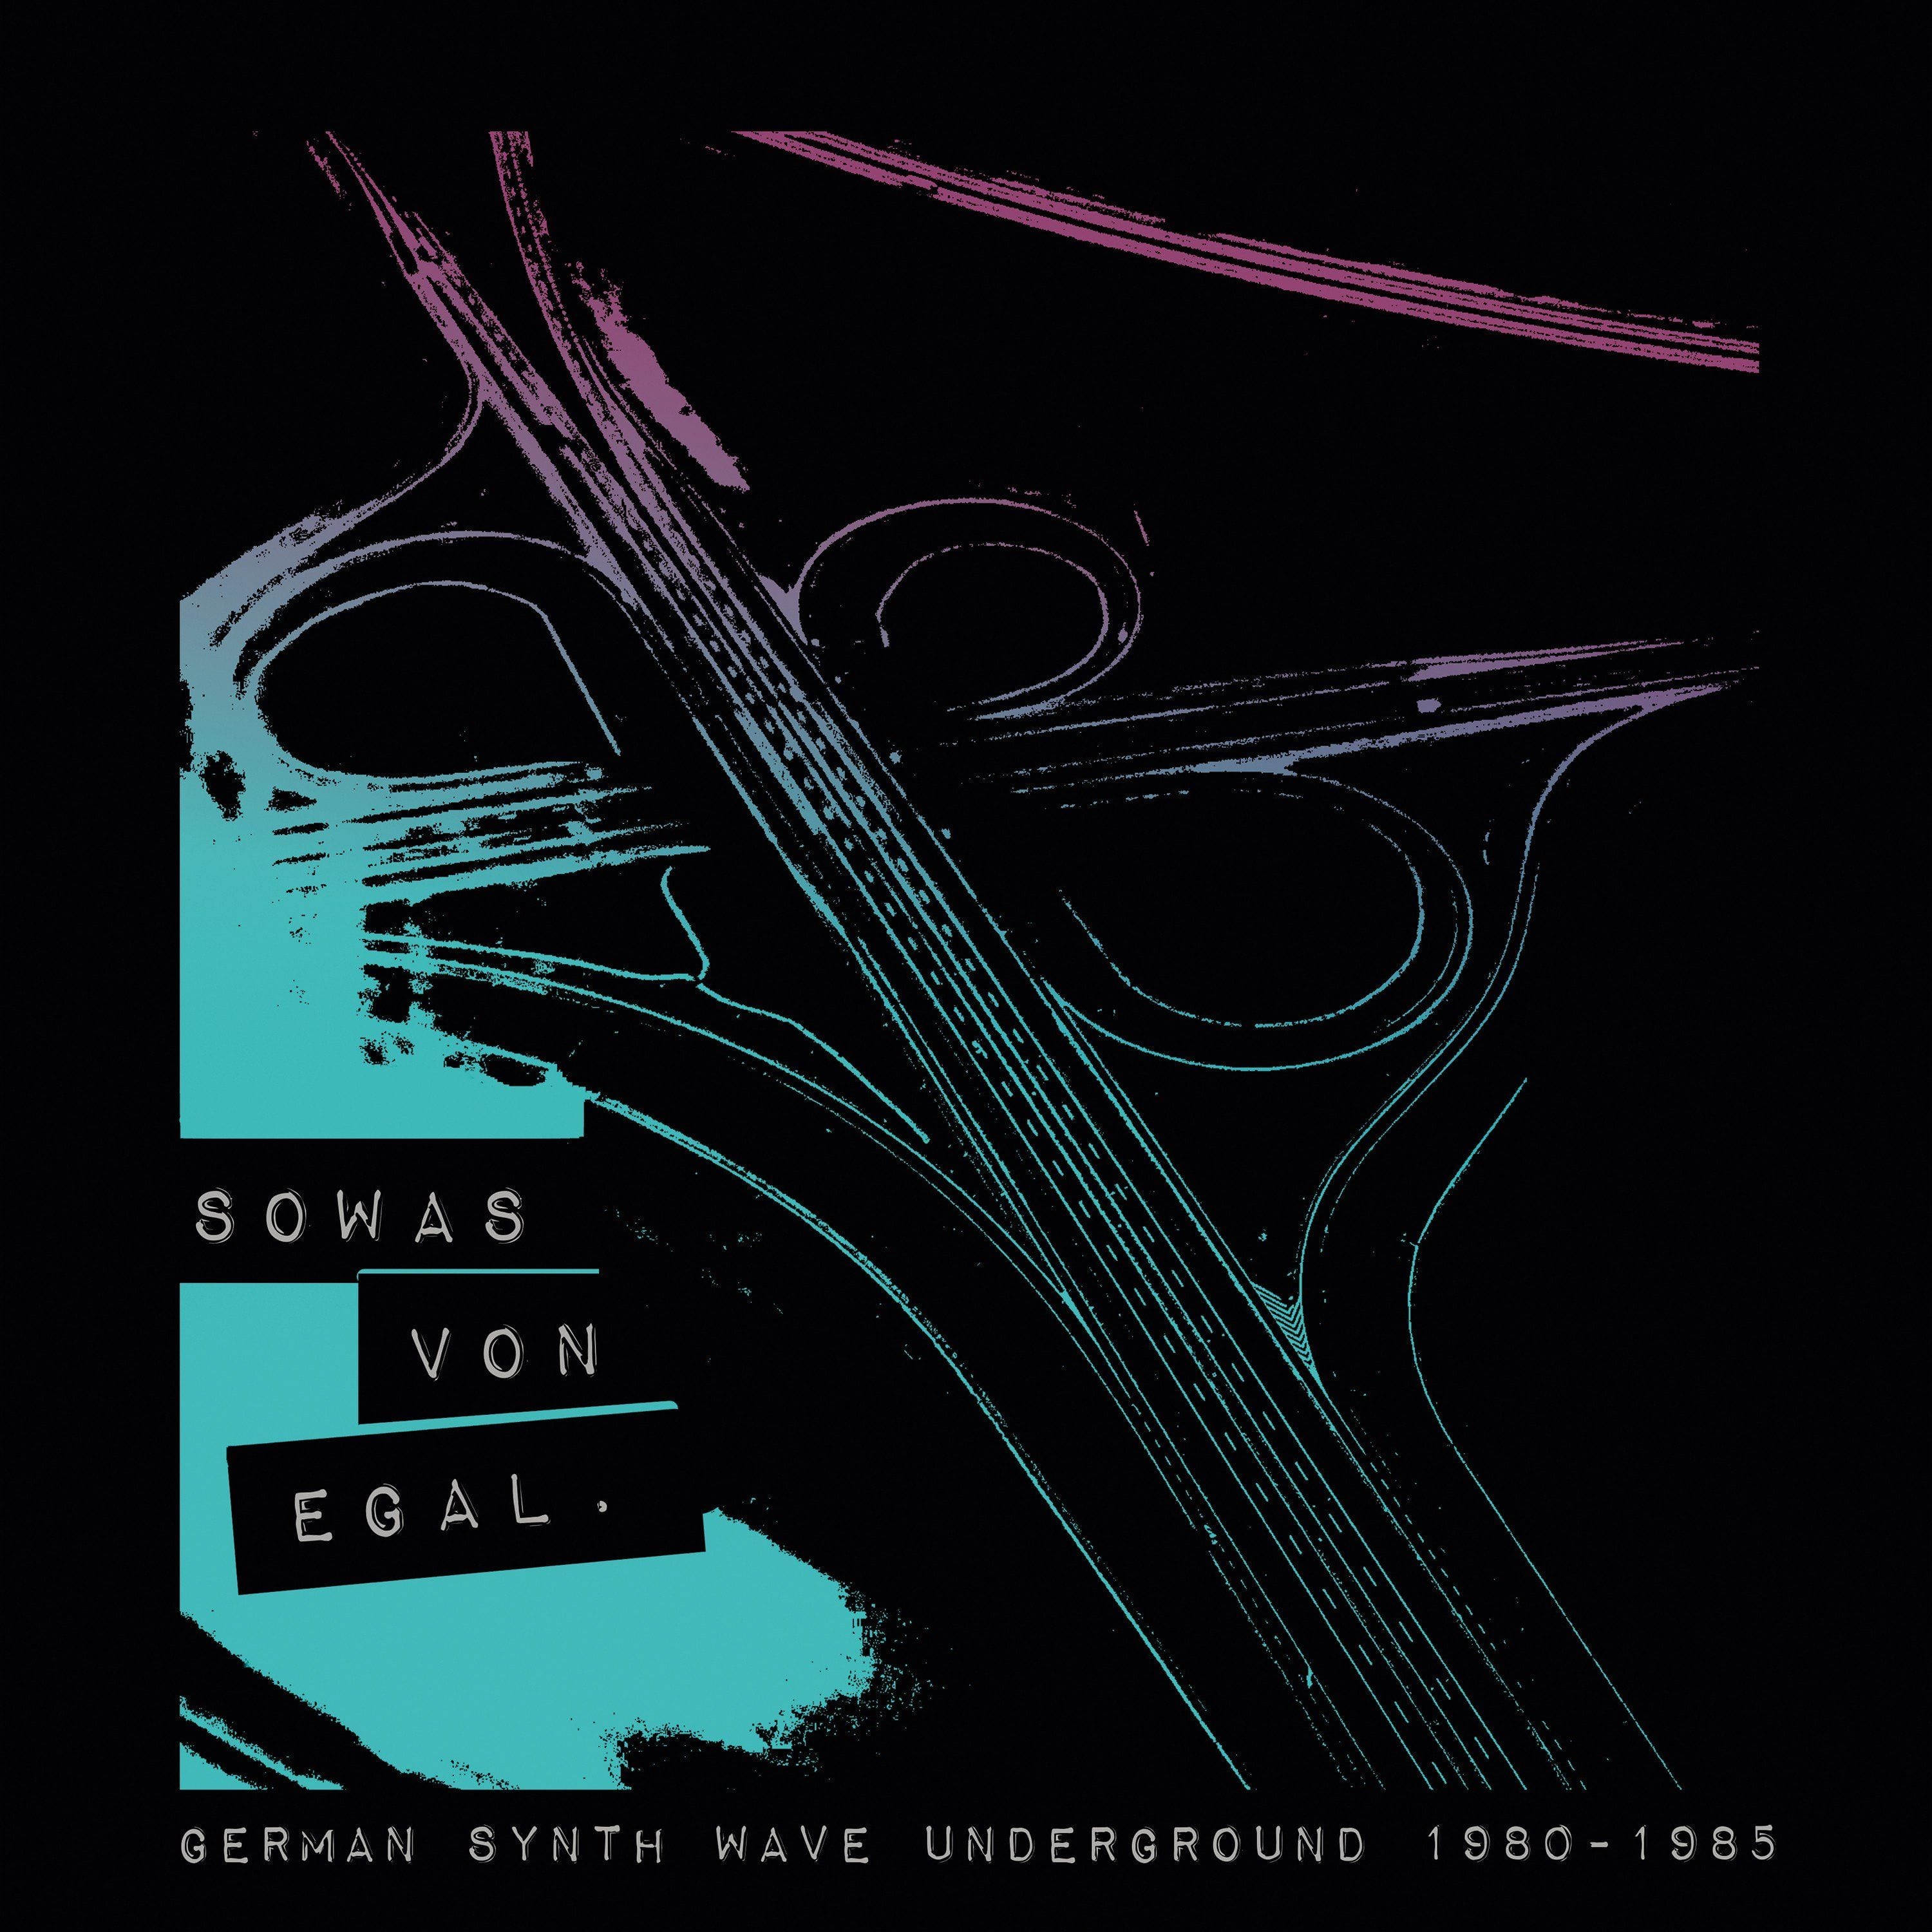 ‘Sowas Von Egal’ Shines a Spotlight on the Undergroud German Synthpop Scene of the Early ’80s